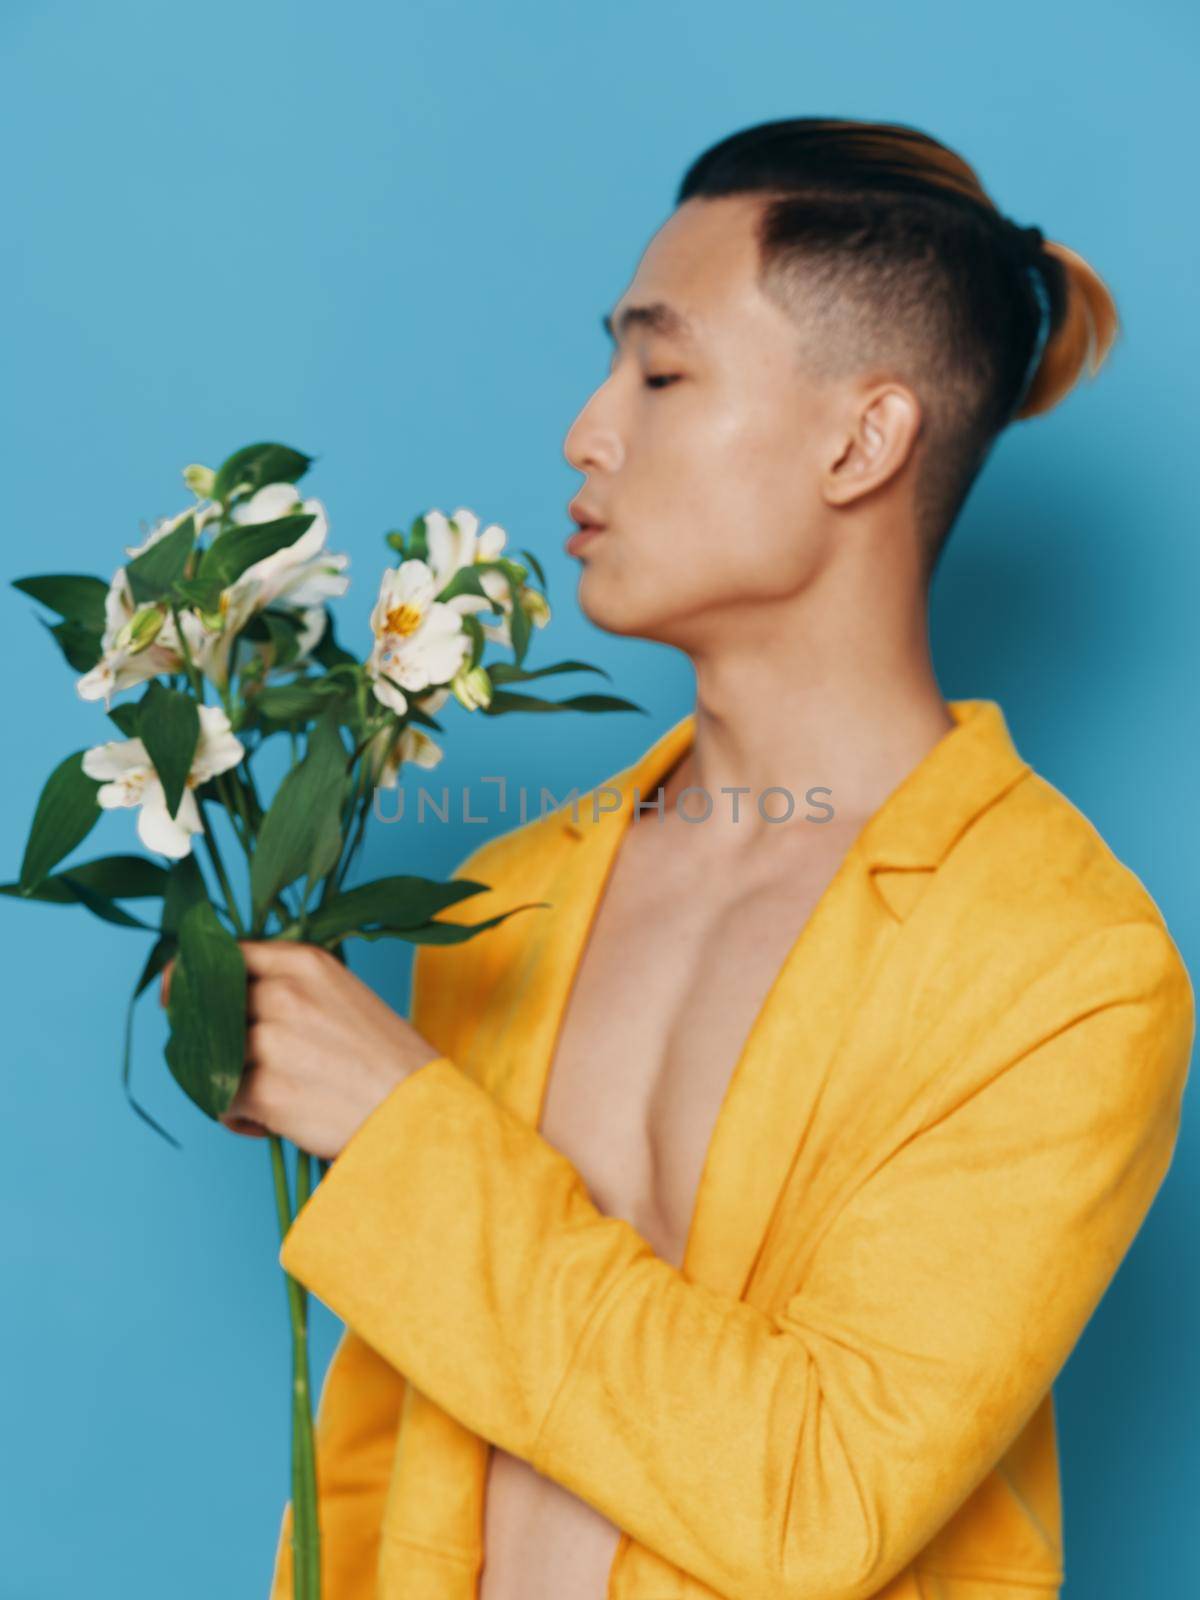 Nice guy with a bouquet of white flowers on a blue background in a yellow coat by SHOTPRIME